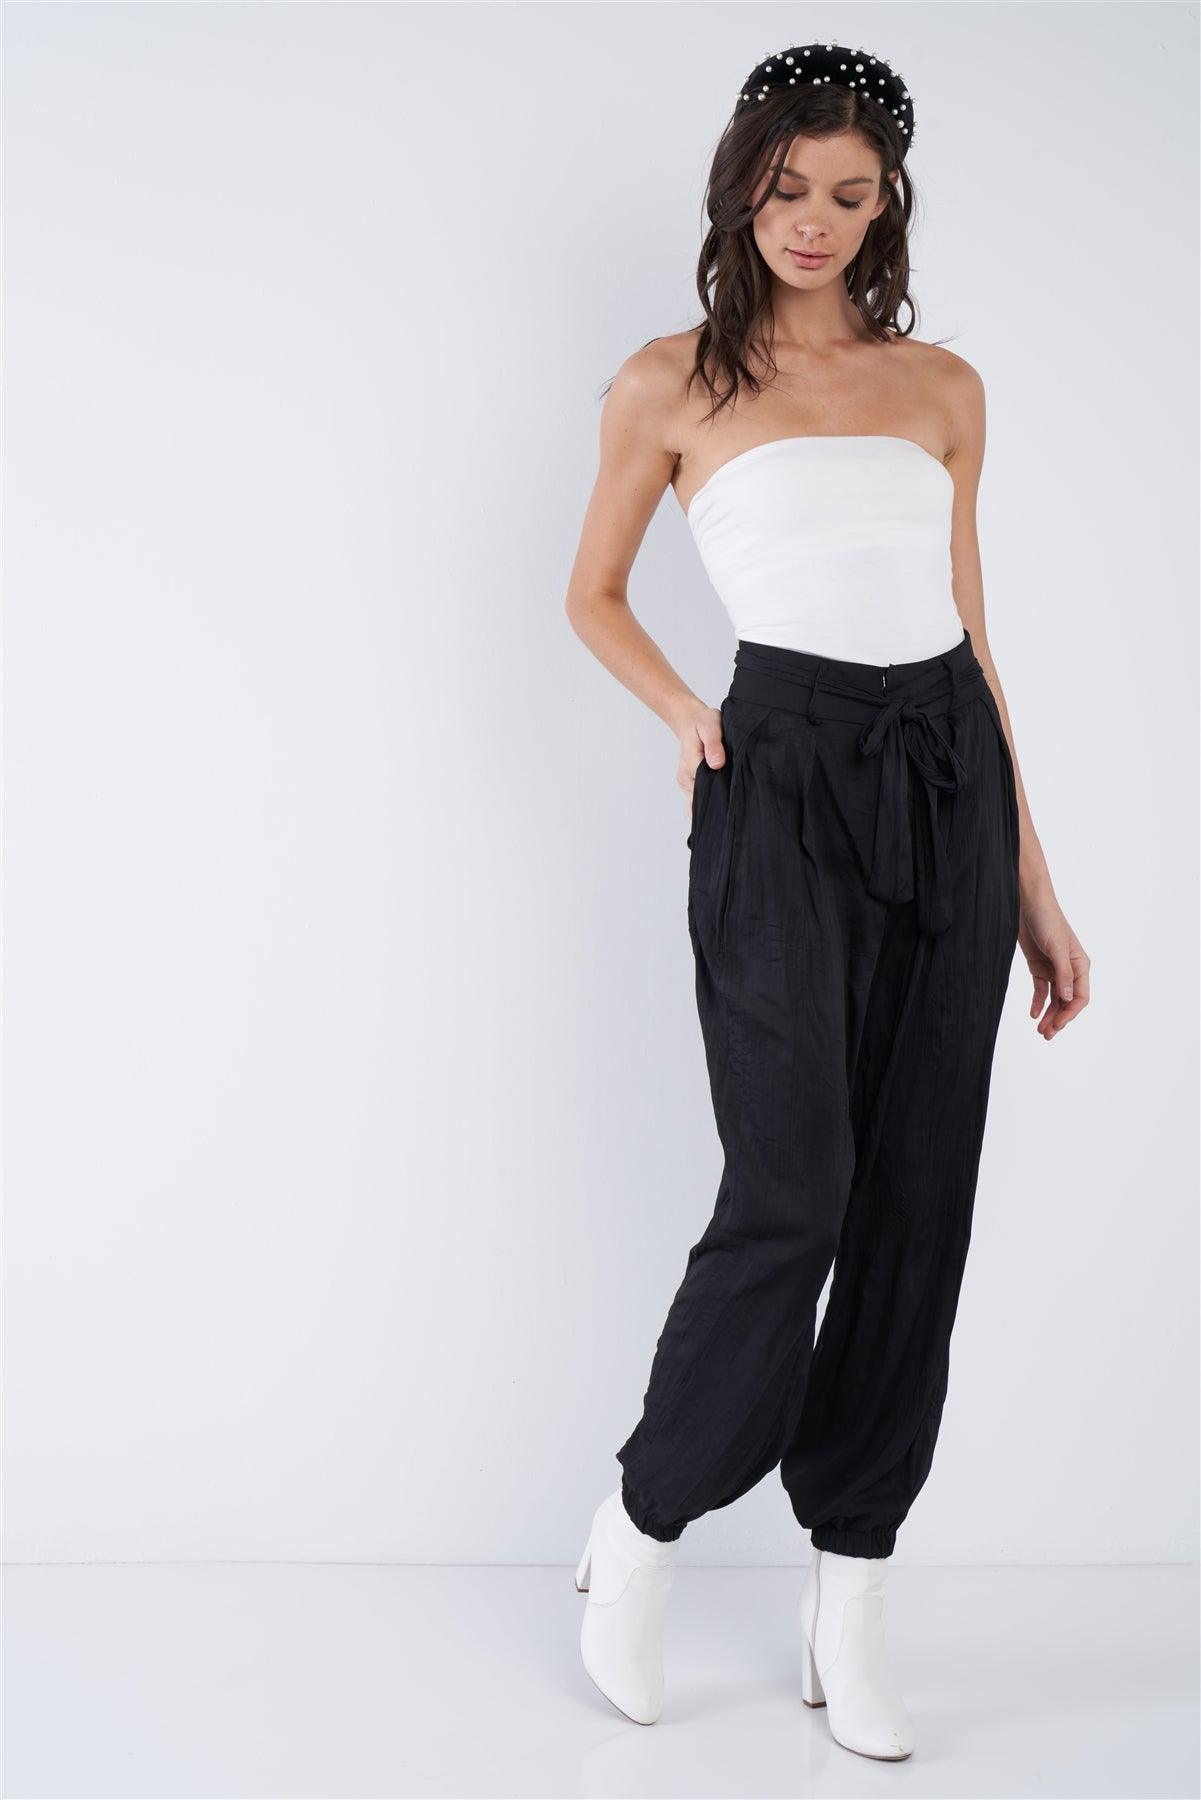 Black Crushed Satin Cinched Ankle Cuff Self Tie Waist Sash Pants /3-2-1